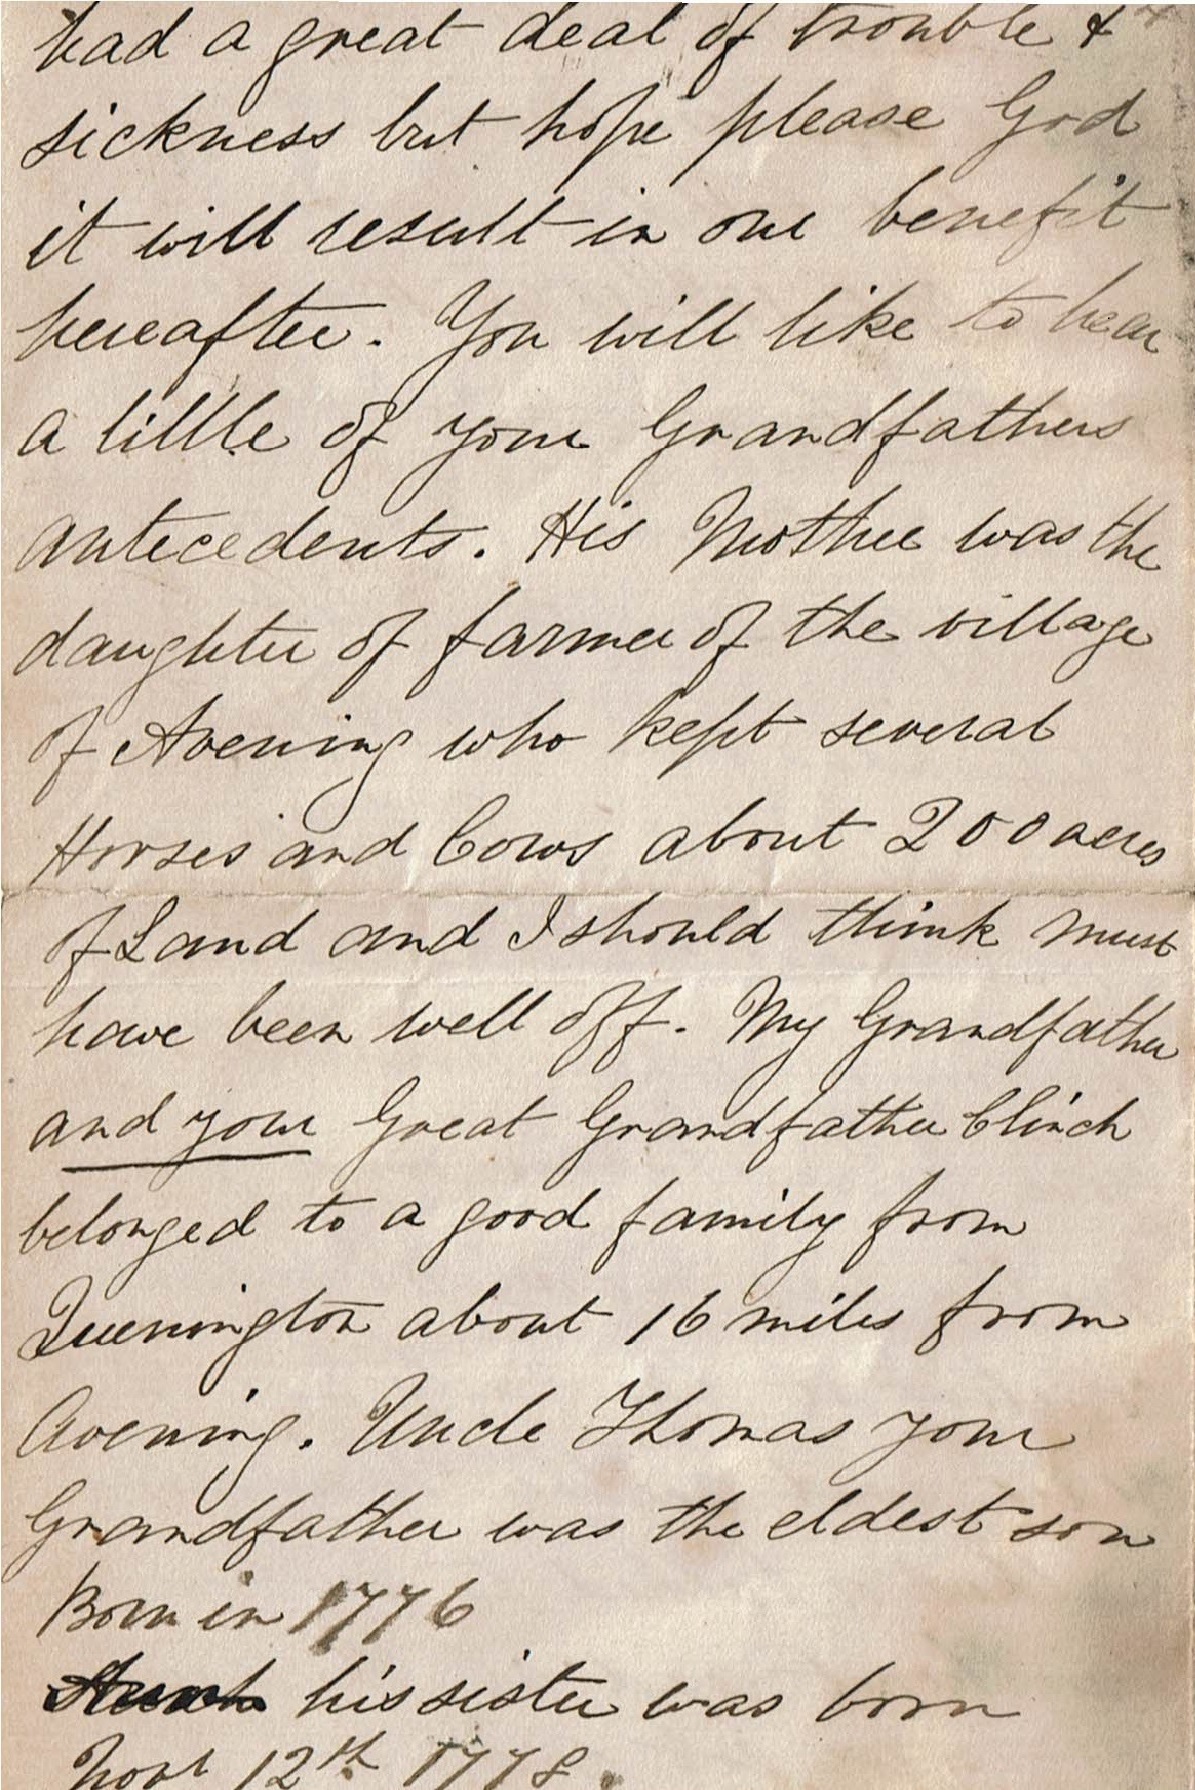 Image of page 4 of Peter's letter